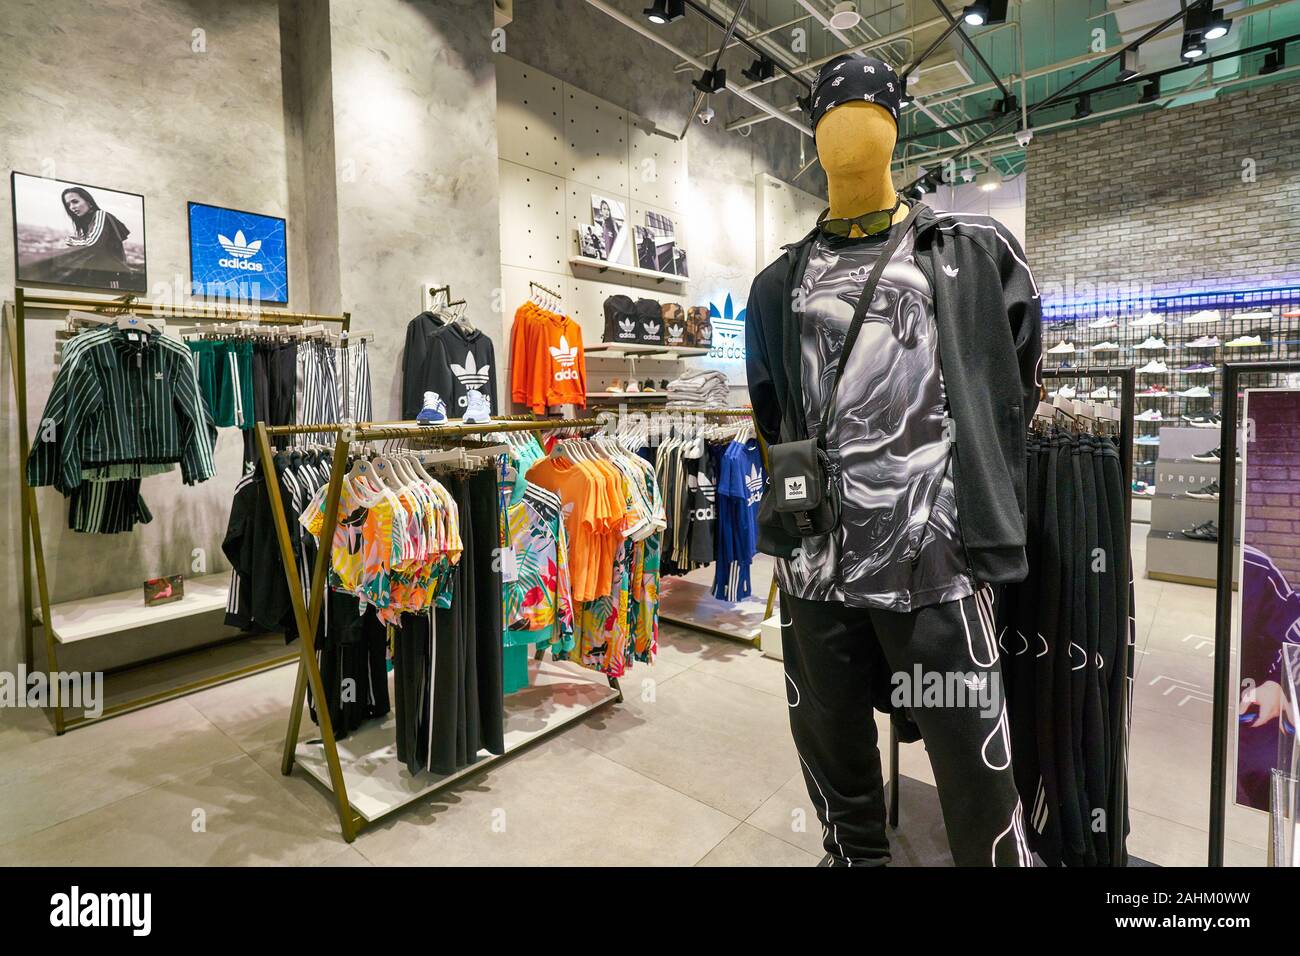 SINGAPORE - APRIL 03, 2019: interior shot of Adidas store at a shopping  mall in Singapore Stock Photo - Alamy